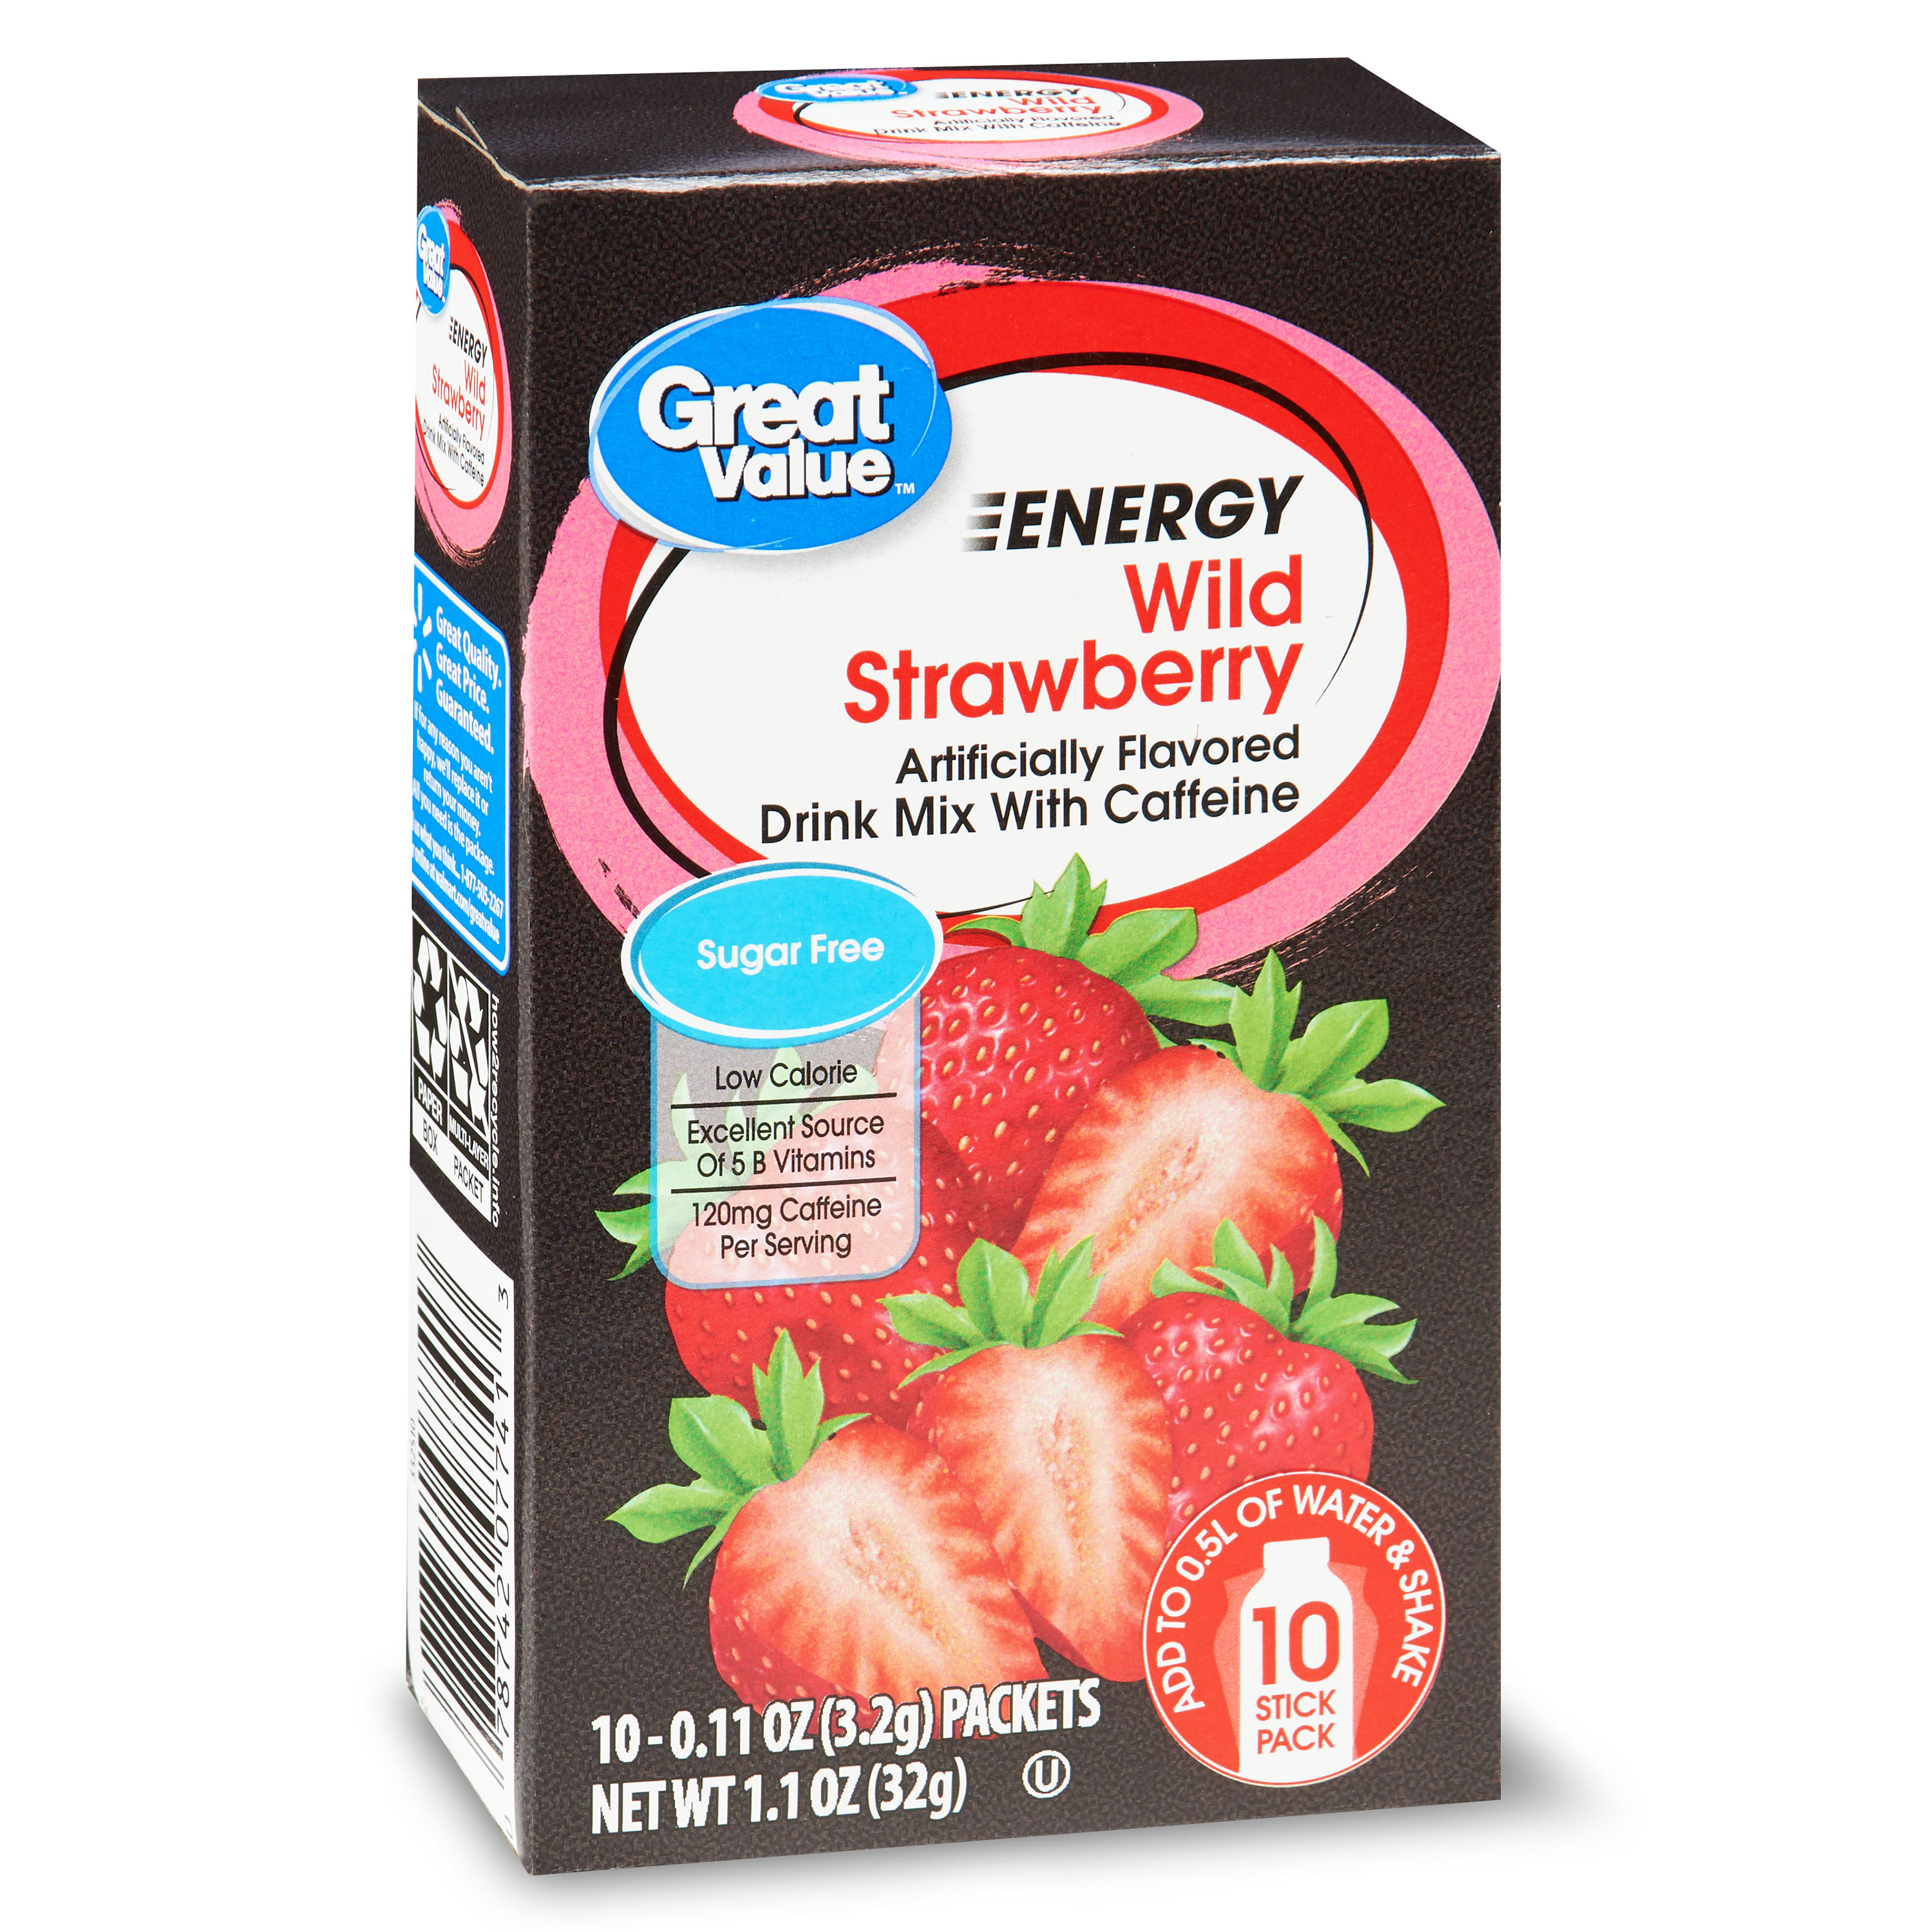 Great Value Sugar-Free Wild Strawberry Energy Drink Mix, 1.1 Oz, 10 Count Image